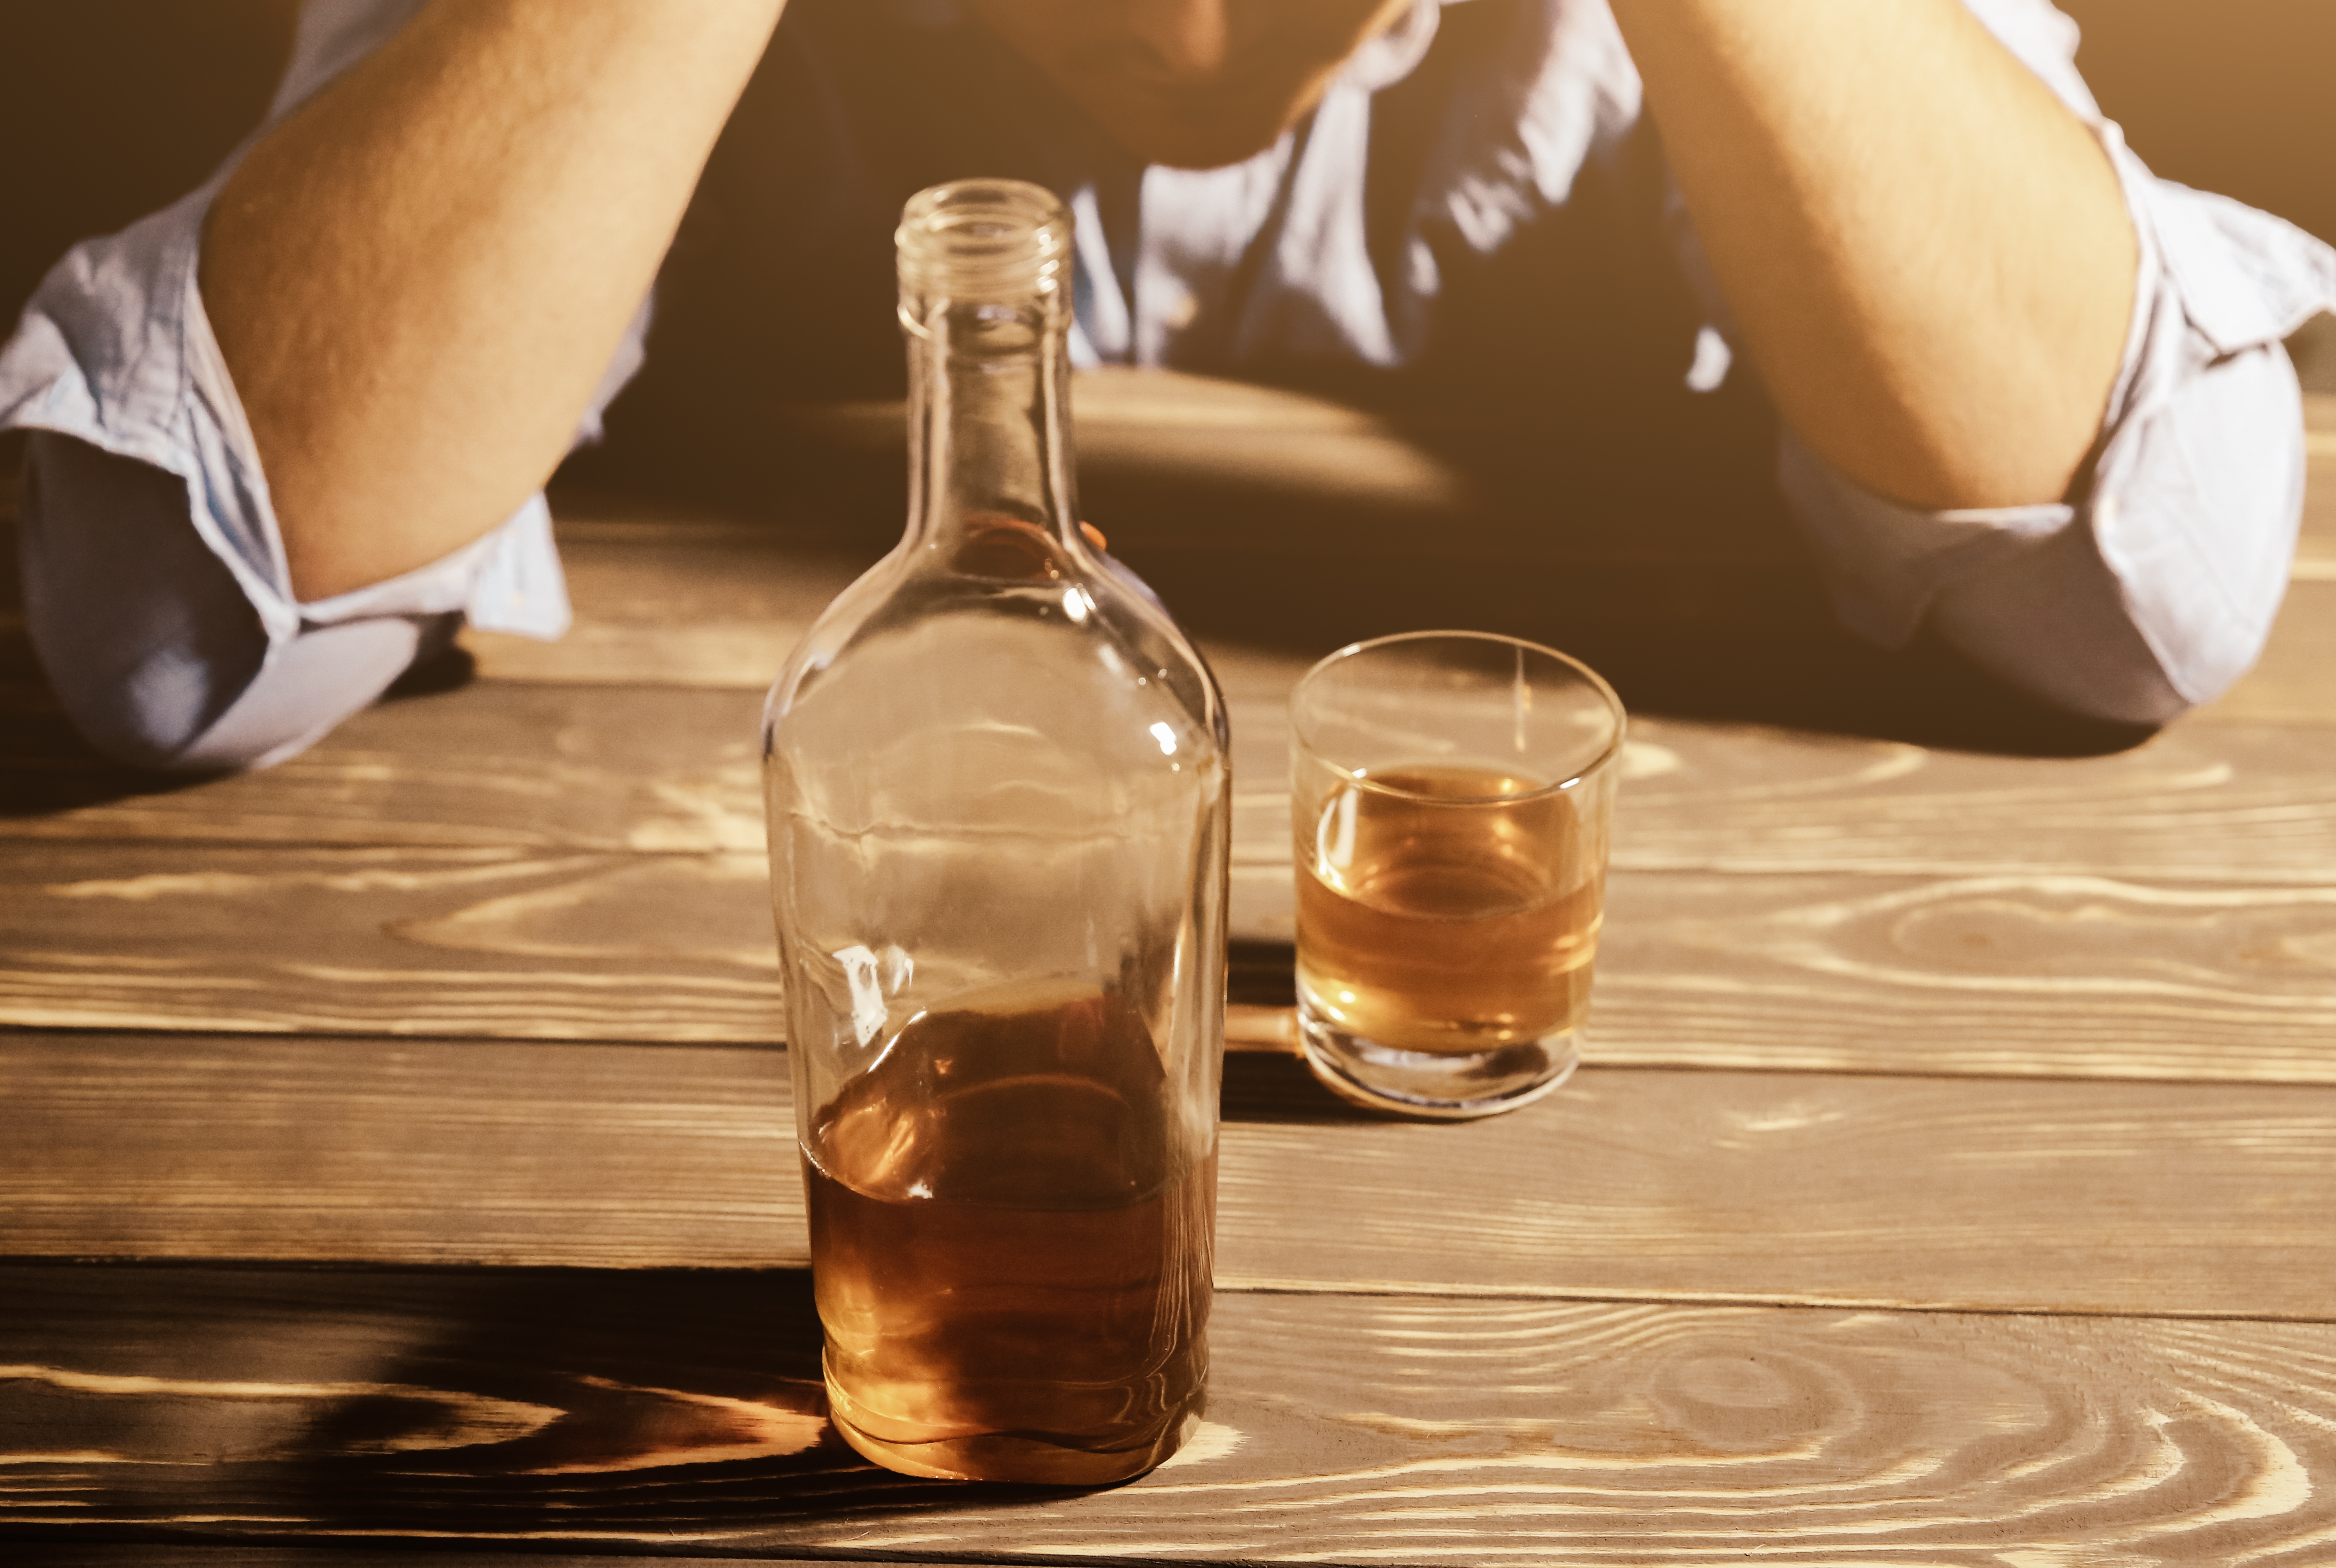 How to Know if Alcohol Abuse is Already a Problem